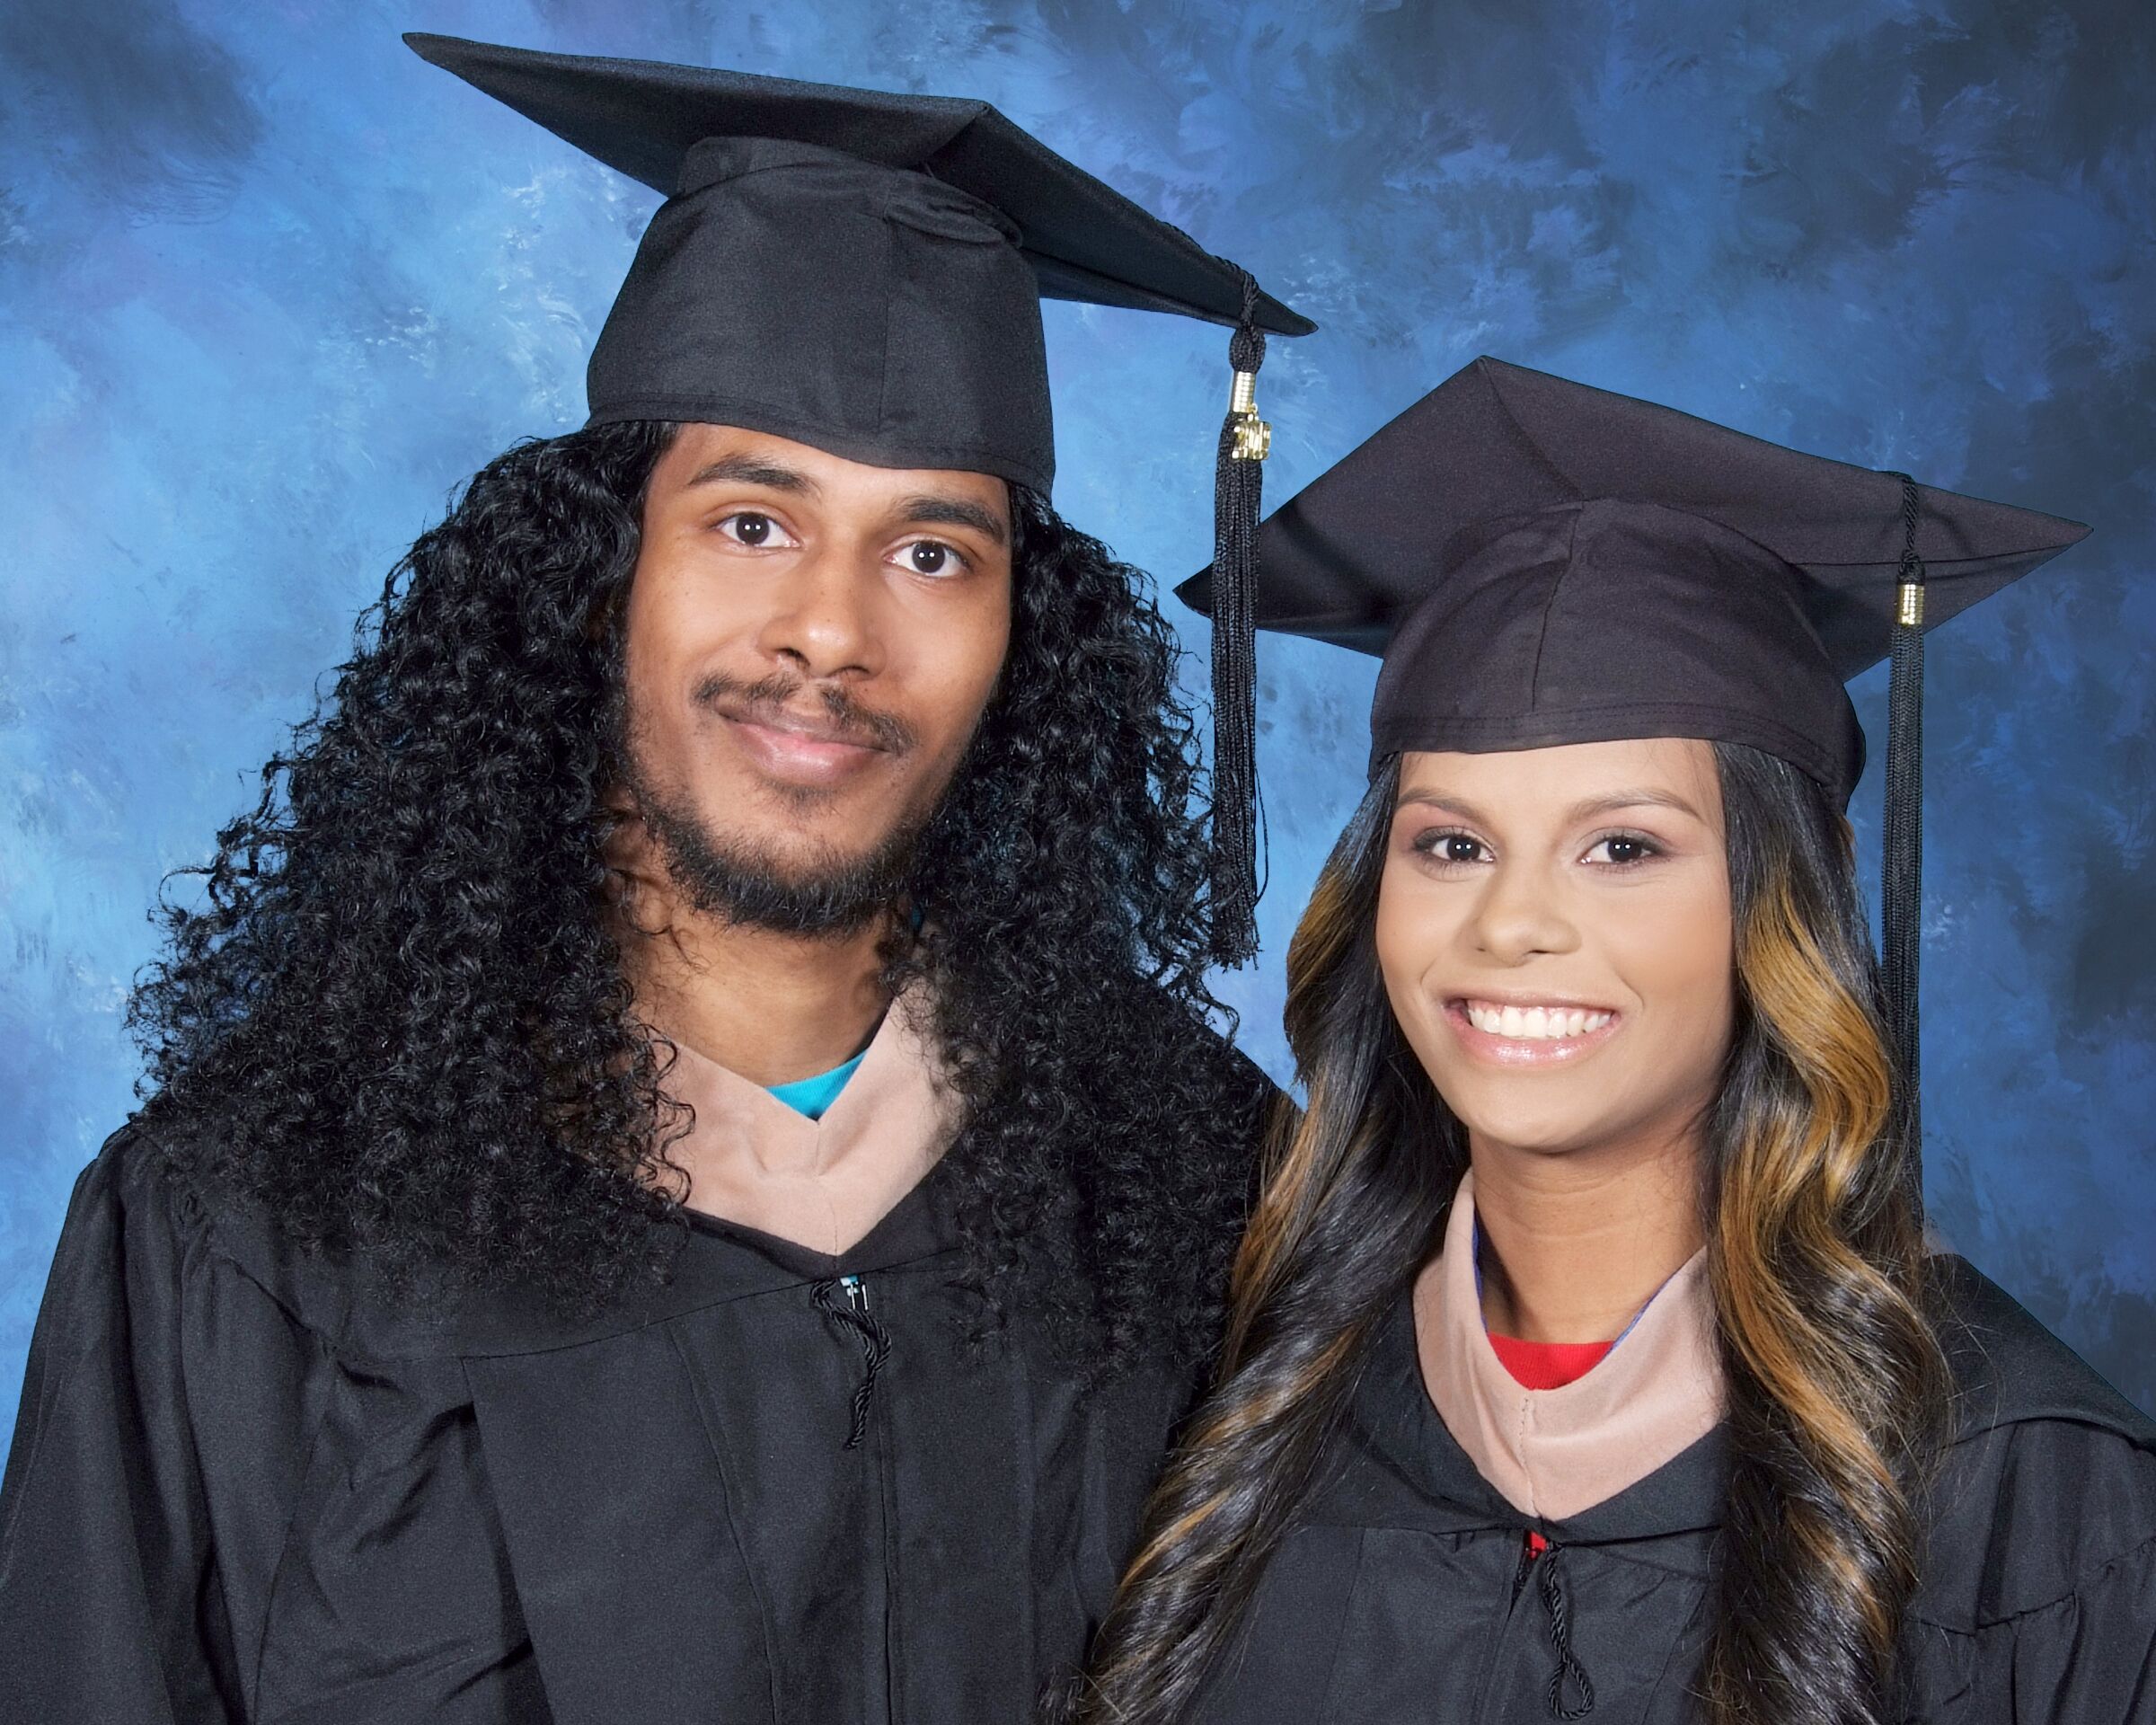 Rajiv and Najeree Wallace in cap and gown